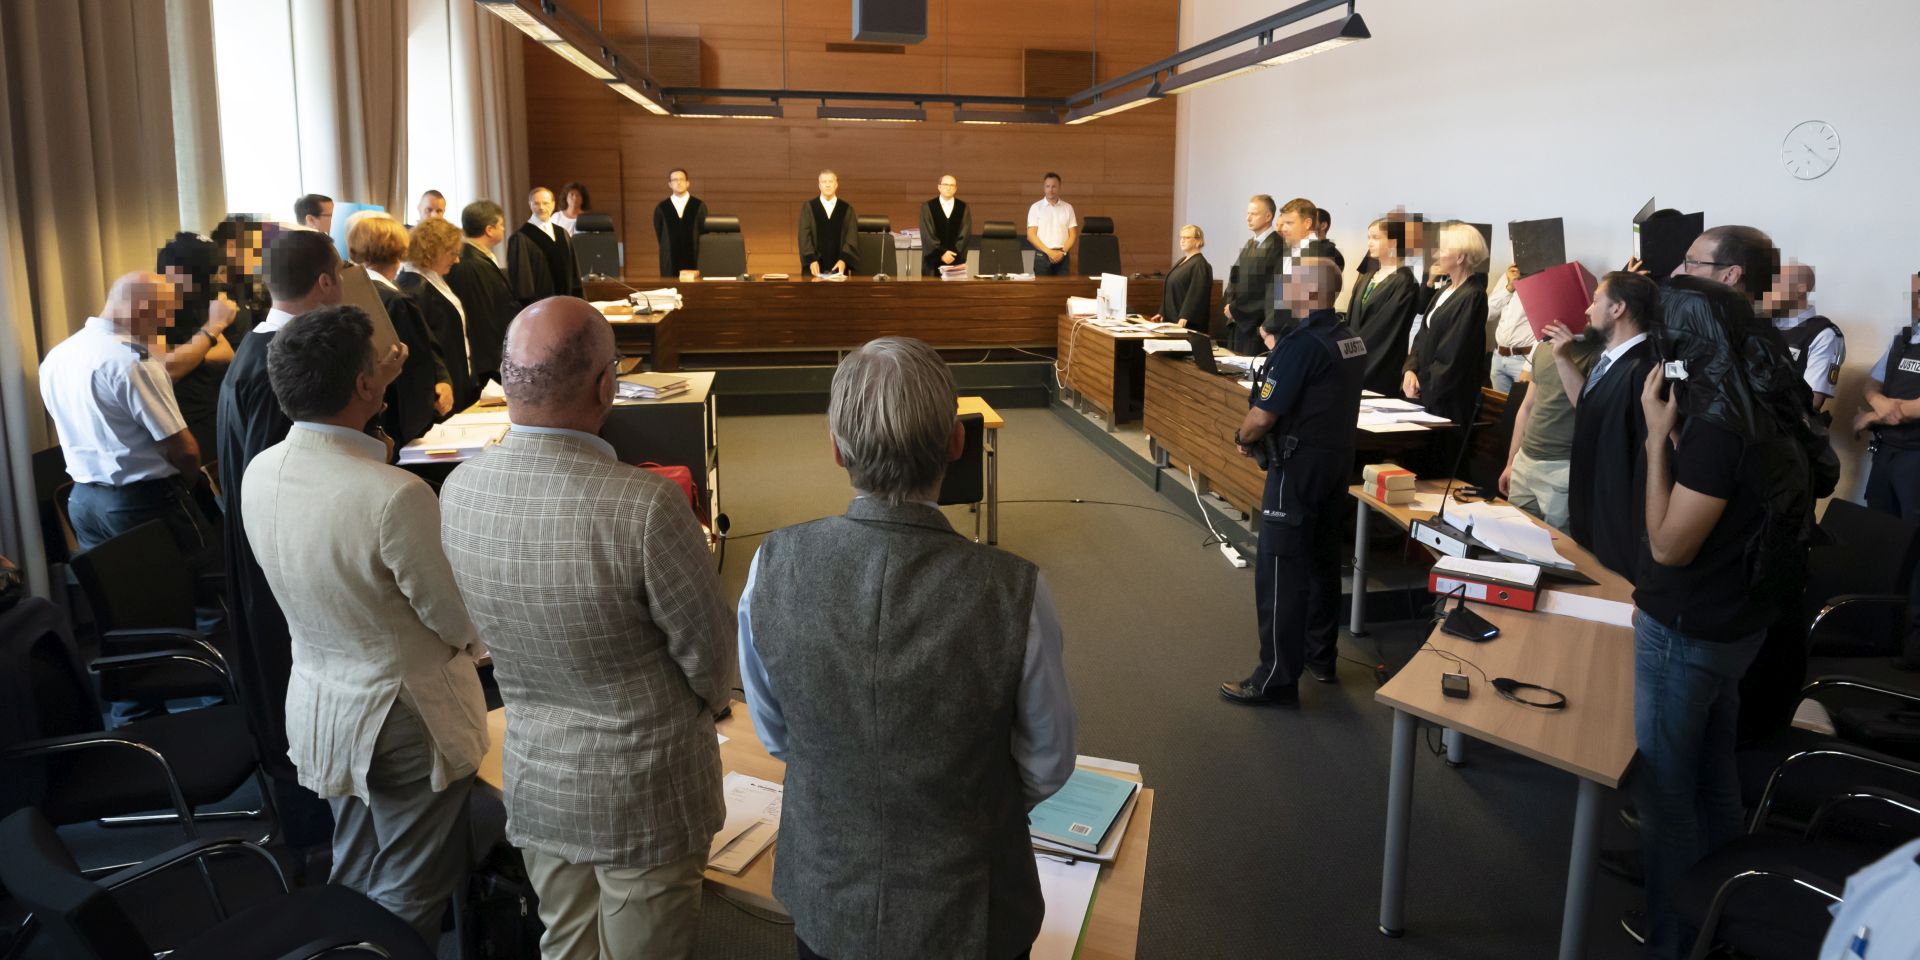 epa07673988 The court during the trial of eleven defendants into the alleged gang rape of an 18-year-old woman, at the regional court's special chamber for juveniles in Freiburg, Germany, 26 June 2019. The public prosecutor's office alleges that Ahmed Al. H. and ten other defendants, are suspected of gang raping a then 18-year-old student on 14 October 2014 outside a techno event at the Hans-Bunte-Areal in Freiburg, southern Germany. According to reports, the accused are eight Syrians, mostly refugees, aged between 19 and 30, an Iraqi, an Algerian and a man with German citizenship.  EPA/RONALD WITTEK ATTENTION EDITORS: IMAGE PIXELATED ACCORDING TO COURT ORDER